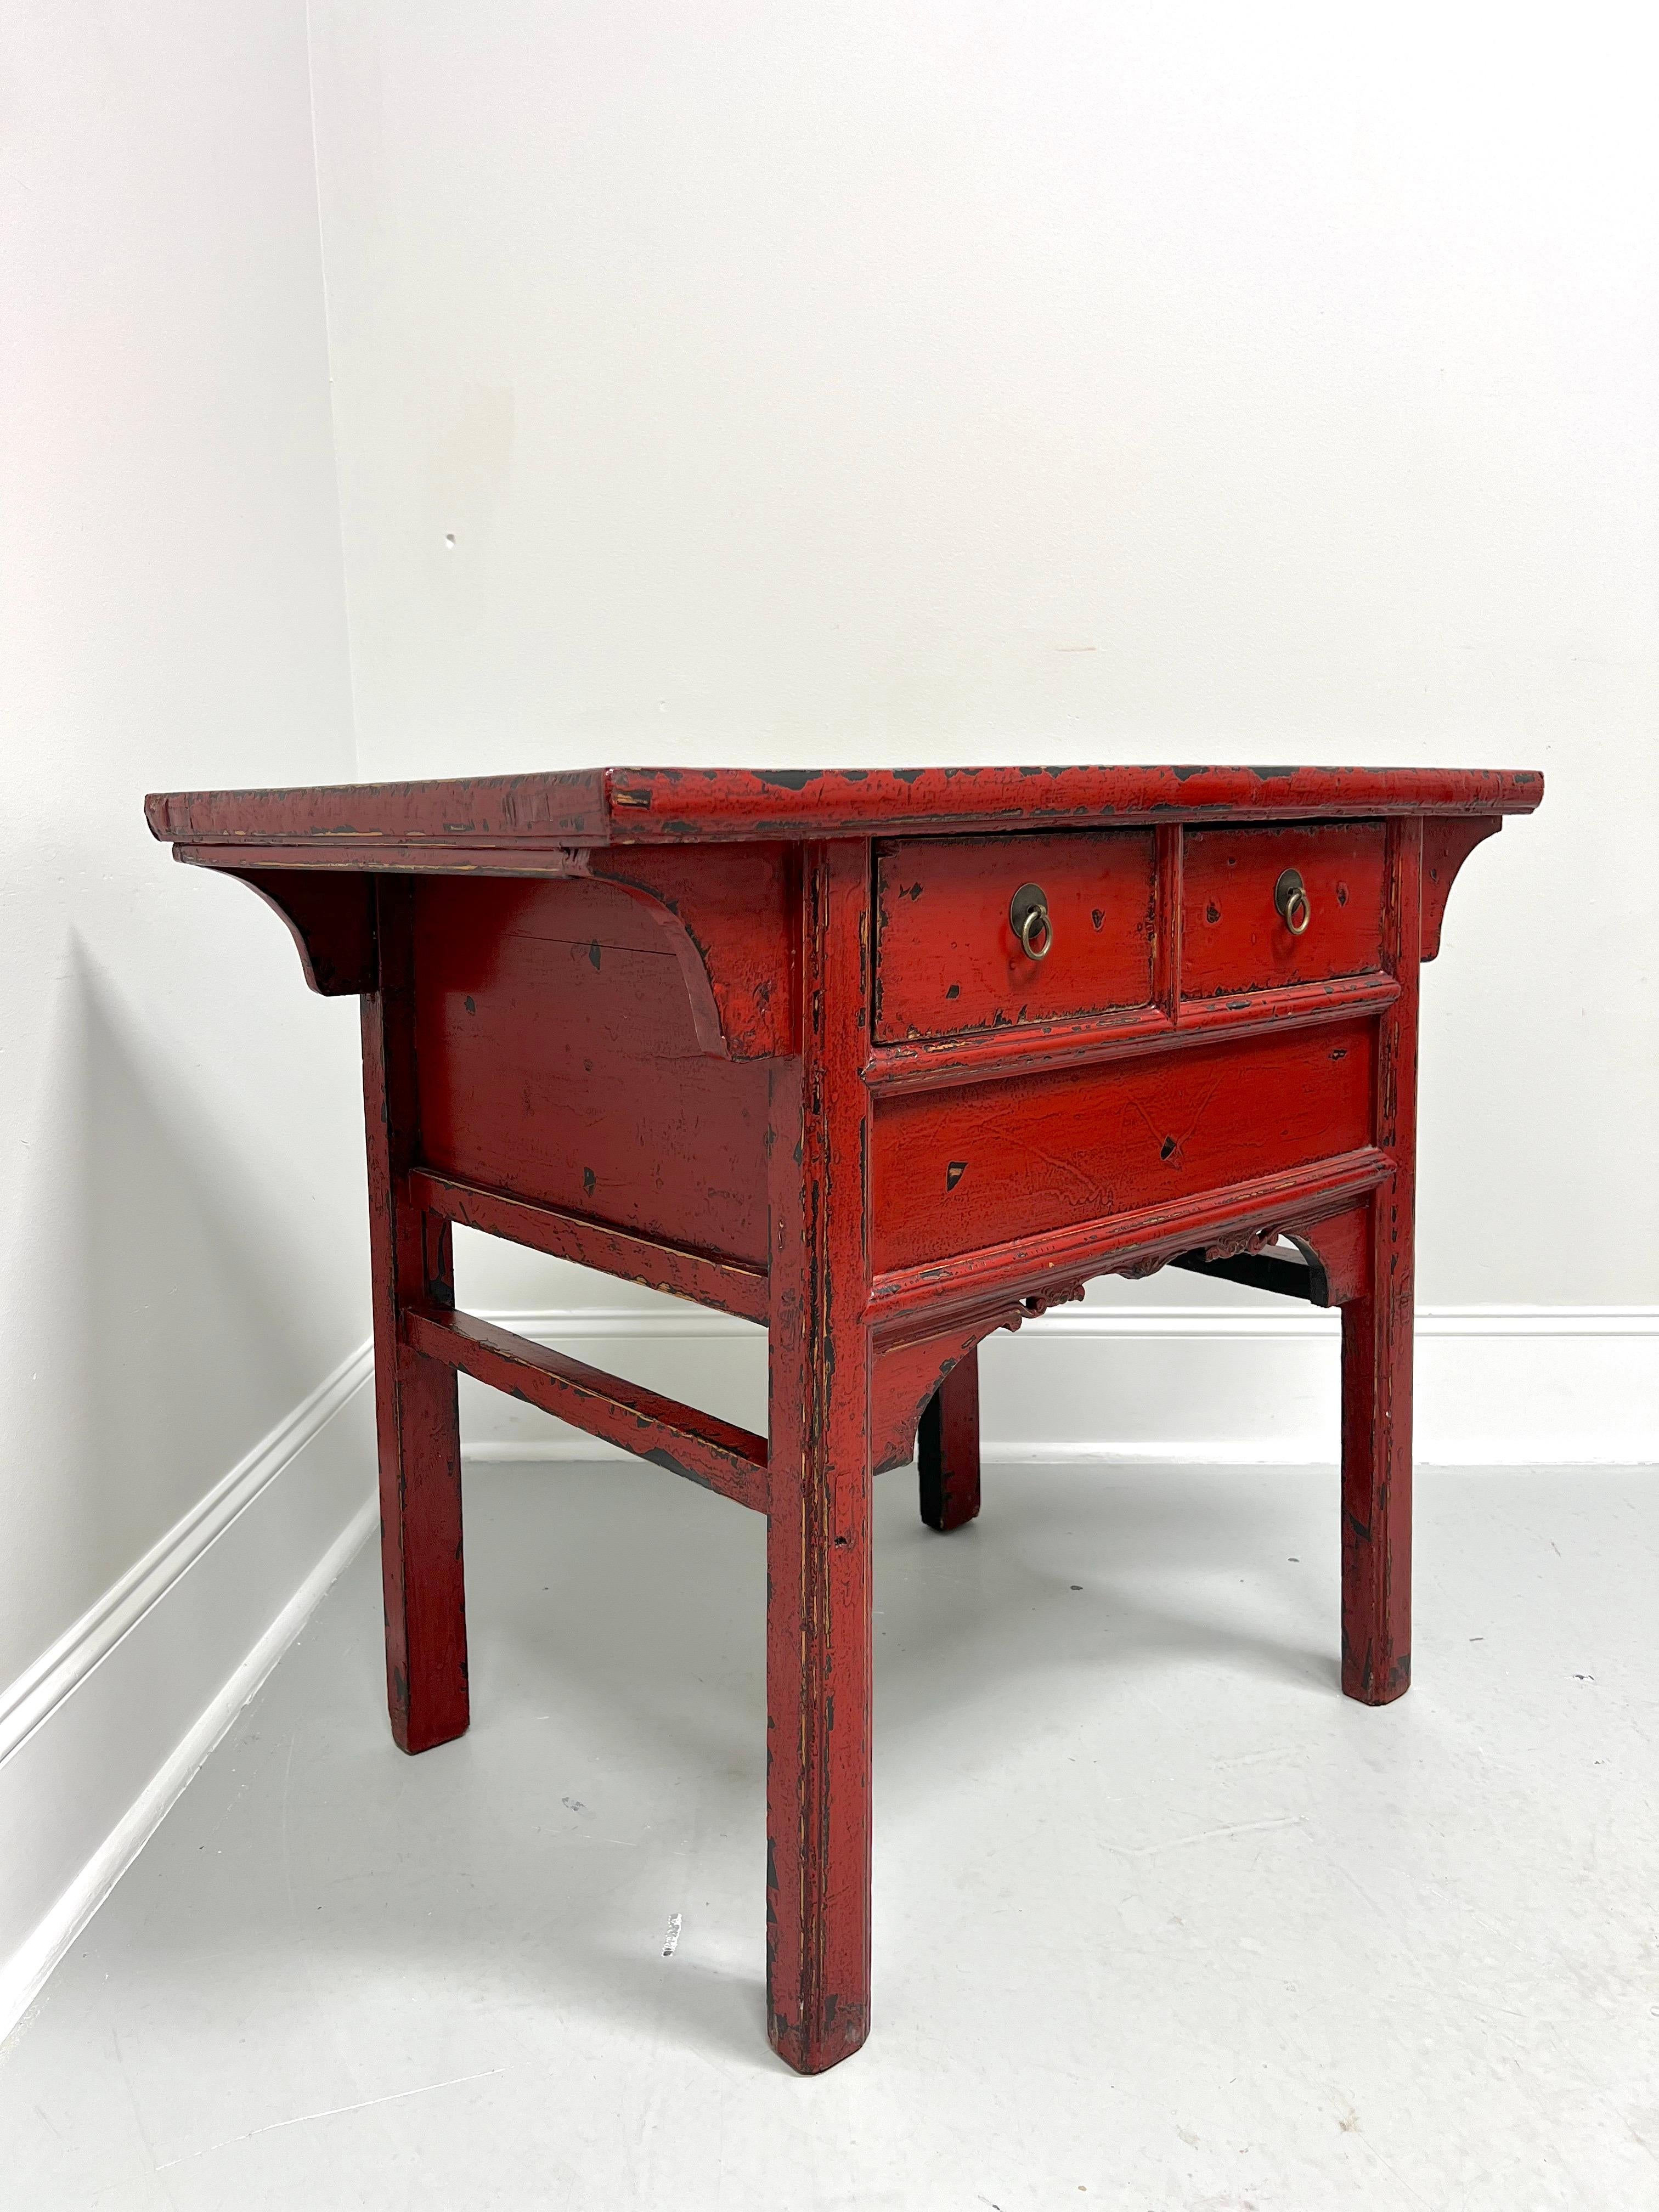 An Asian Chinese altar table, unbranded. Solid wood painted red, distressed to give appearance of advanced age, brass hardware, banded plank top with smooth edge, carved angular sides, carved apron, and square straight legs. Features two drawers of